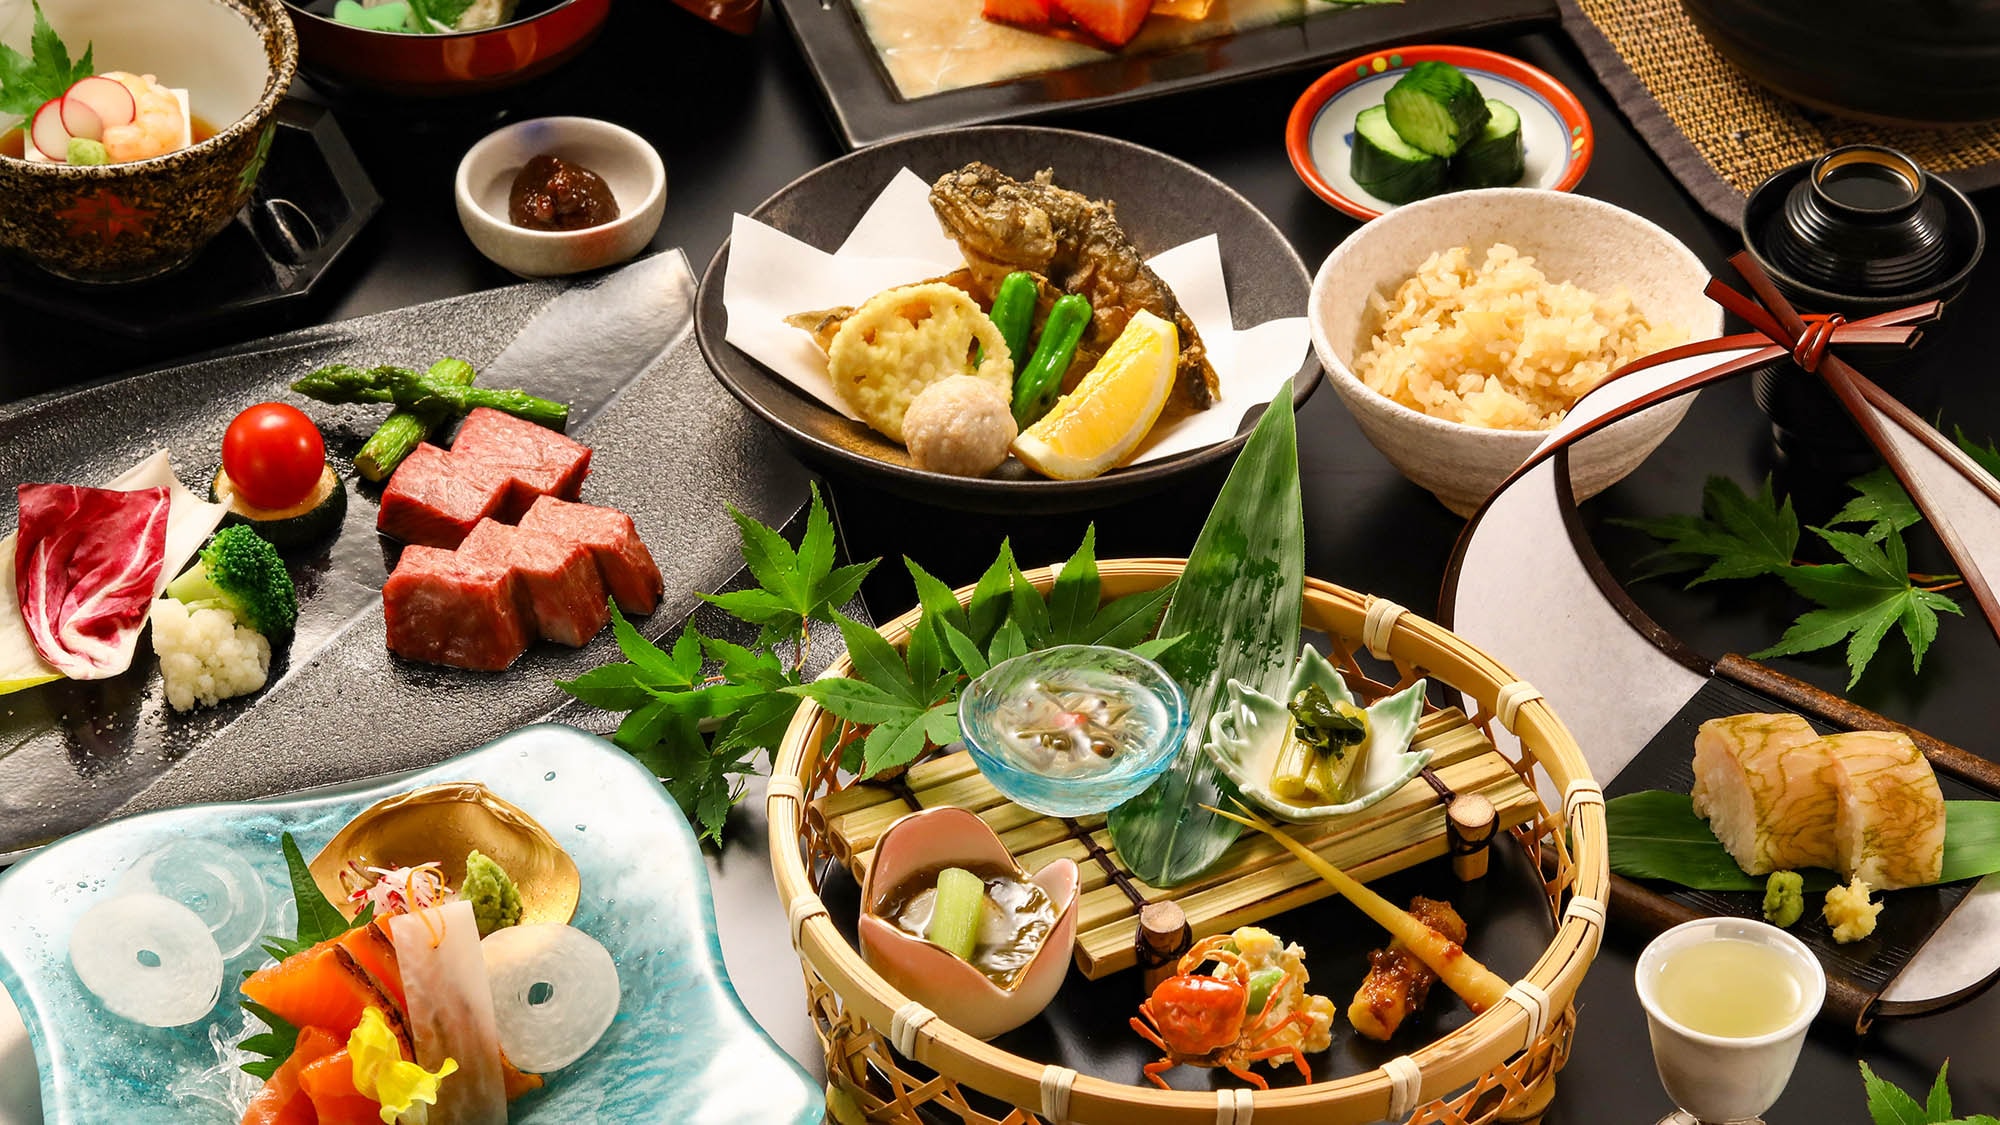 ・[Dinner example] Enjoy the variety of ingredients from Shinshu